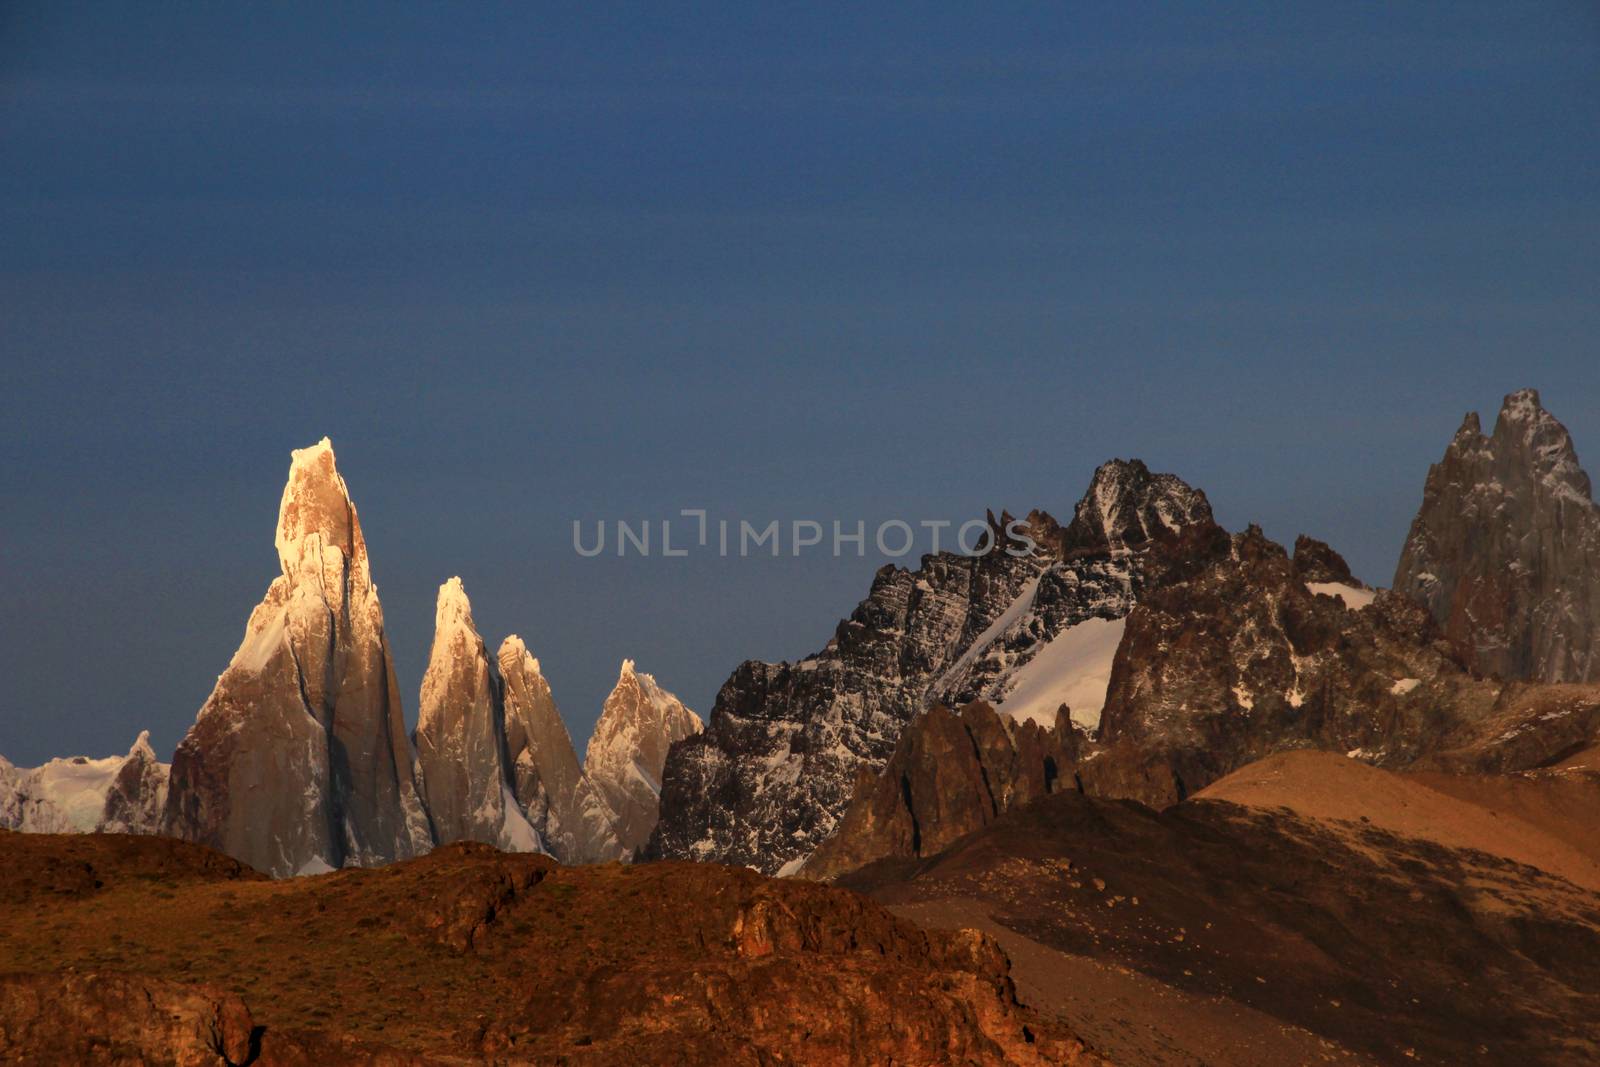 Cerro Torre mountainline at sunrise, Patagonia, Argentina by cicloco